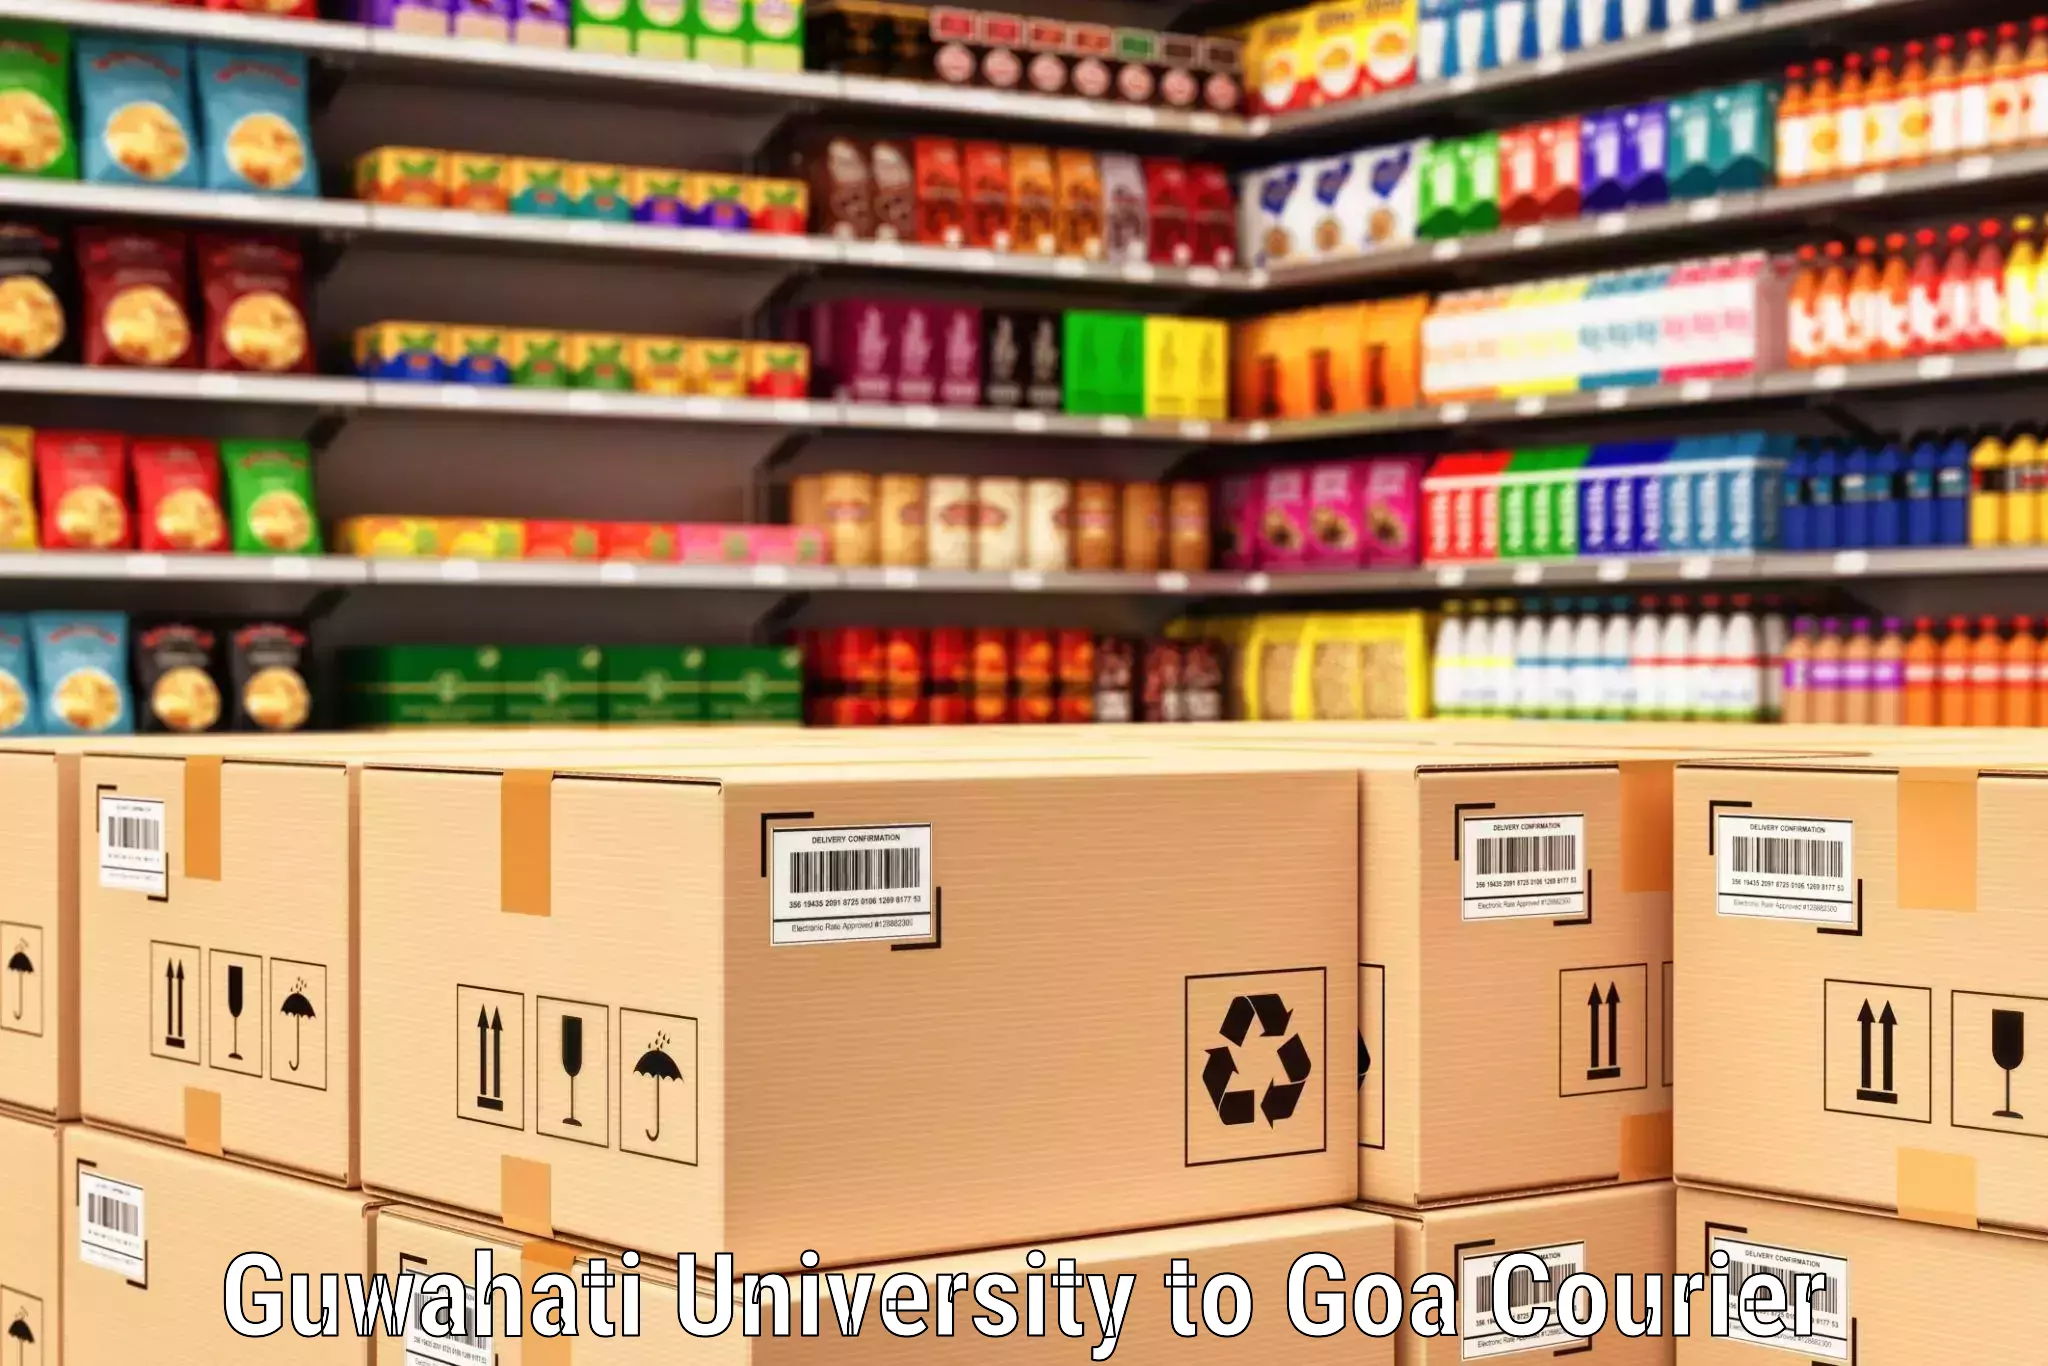 Courier service booking Guwahati University to South Goa